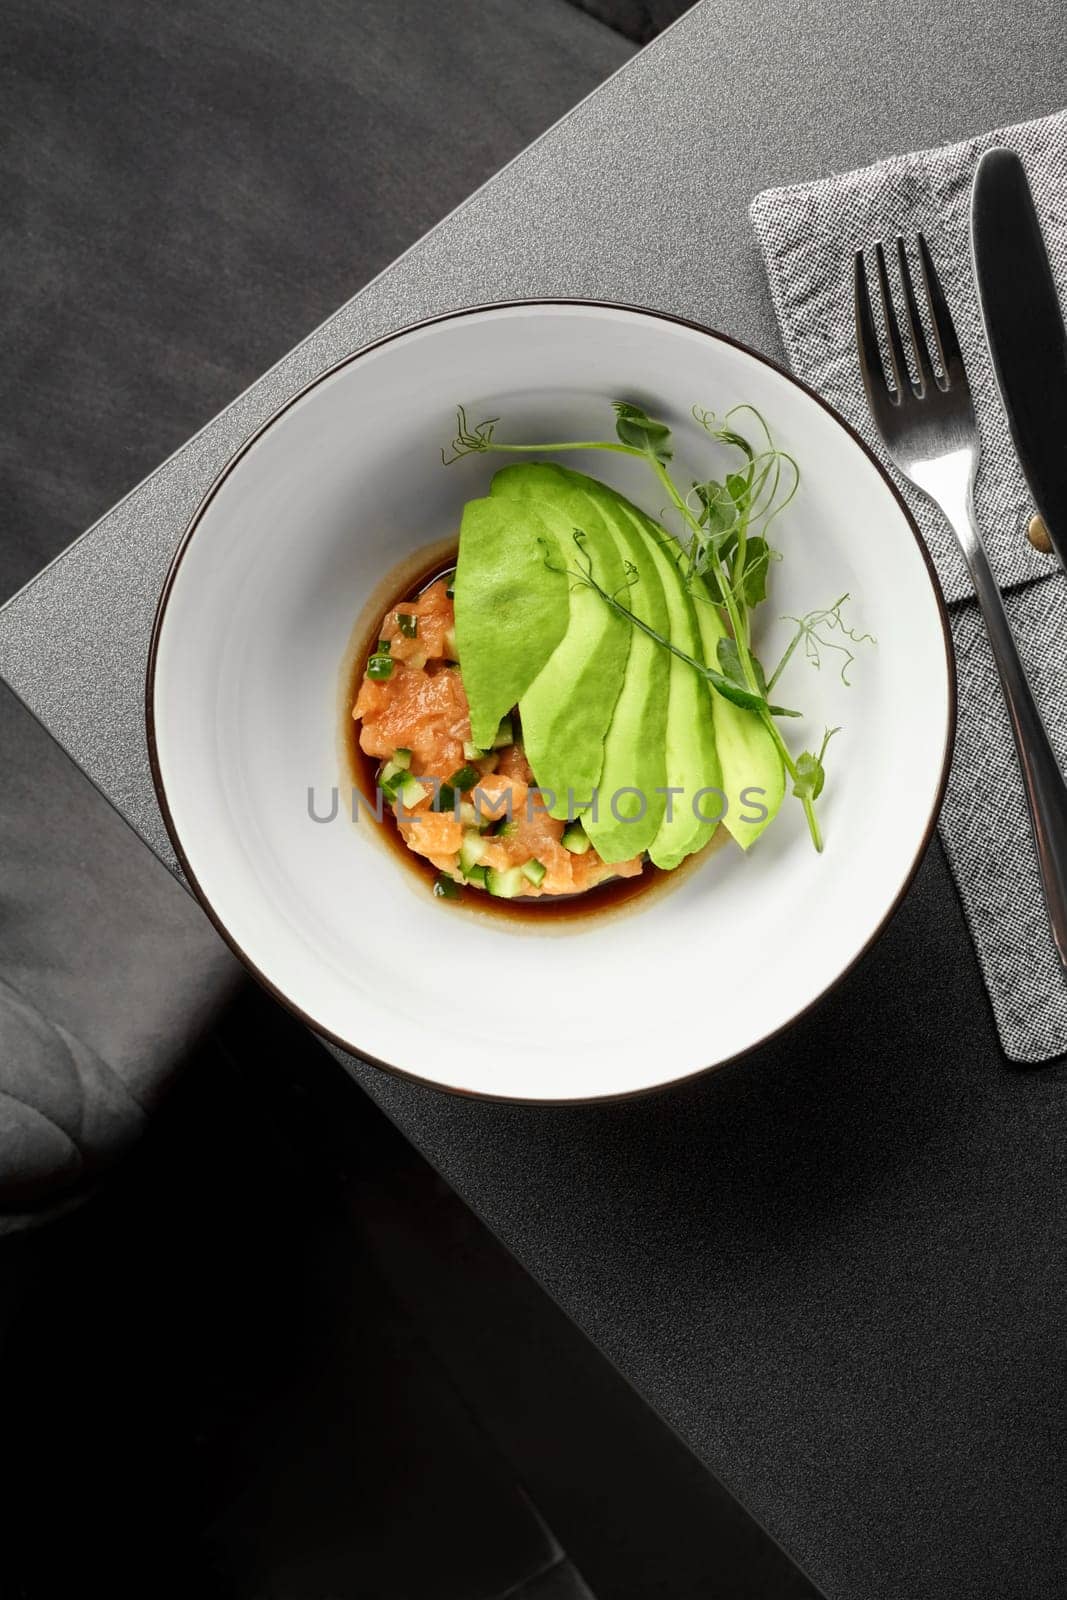 Delicious raw salmon tartare with diced cucumber and ripe avocado slices dressed with flavorful Pan Asian sauce garnished with fresh greens served in white bowl